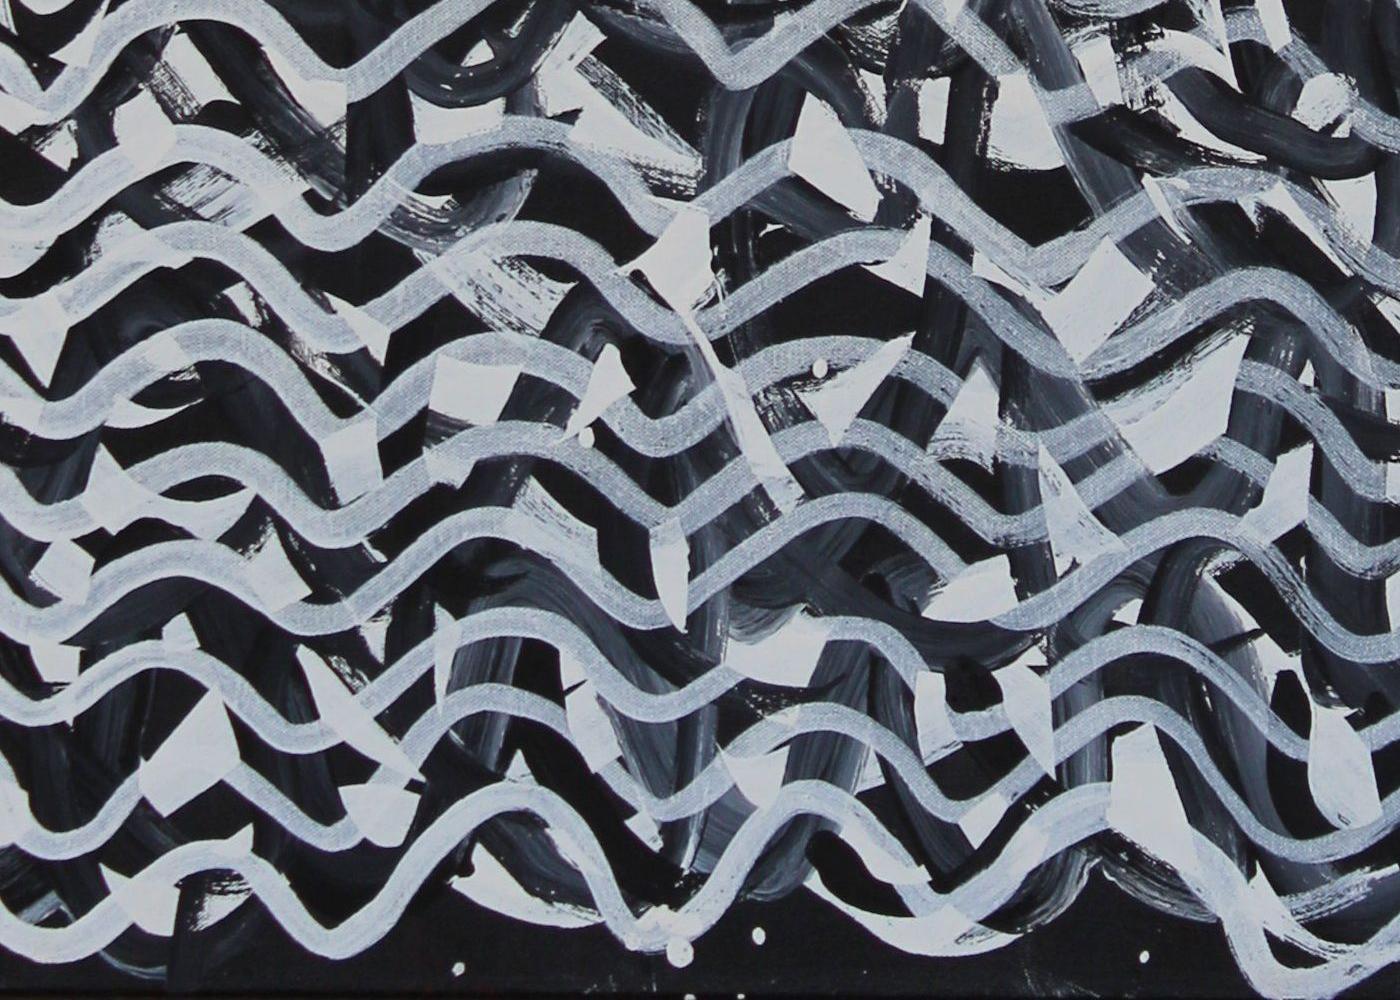 Milkwater. Black and white abstract Aboriginal painting about water. Ocher. - Painting by Kittey Malarvie